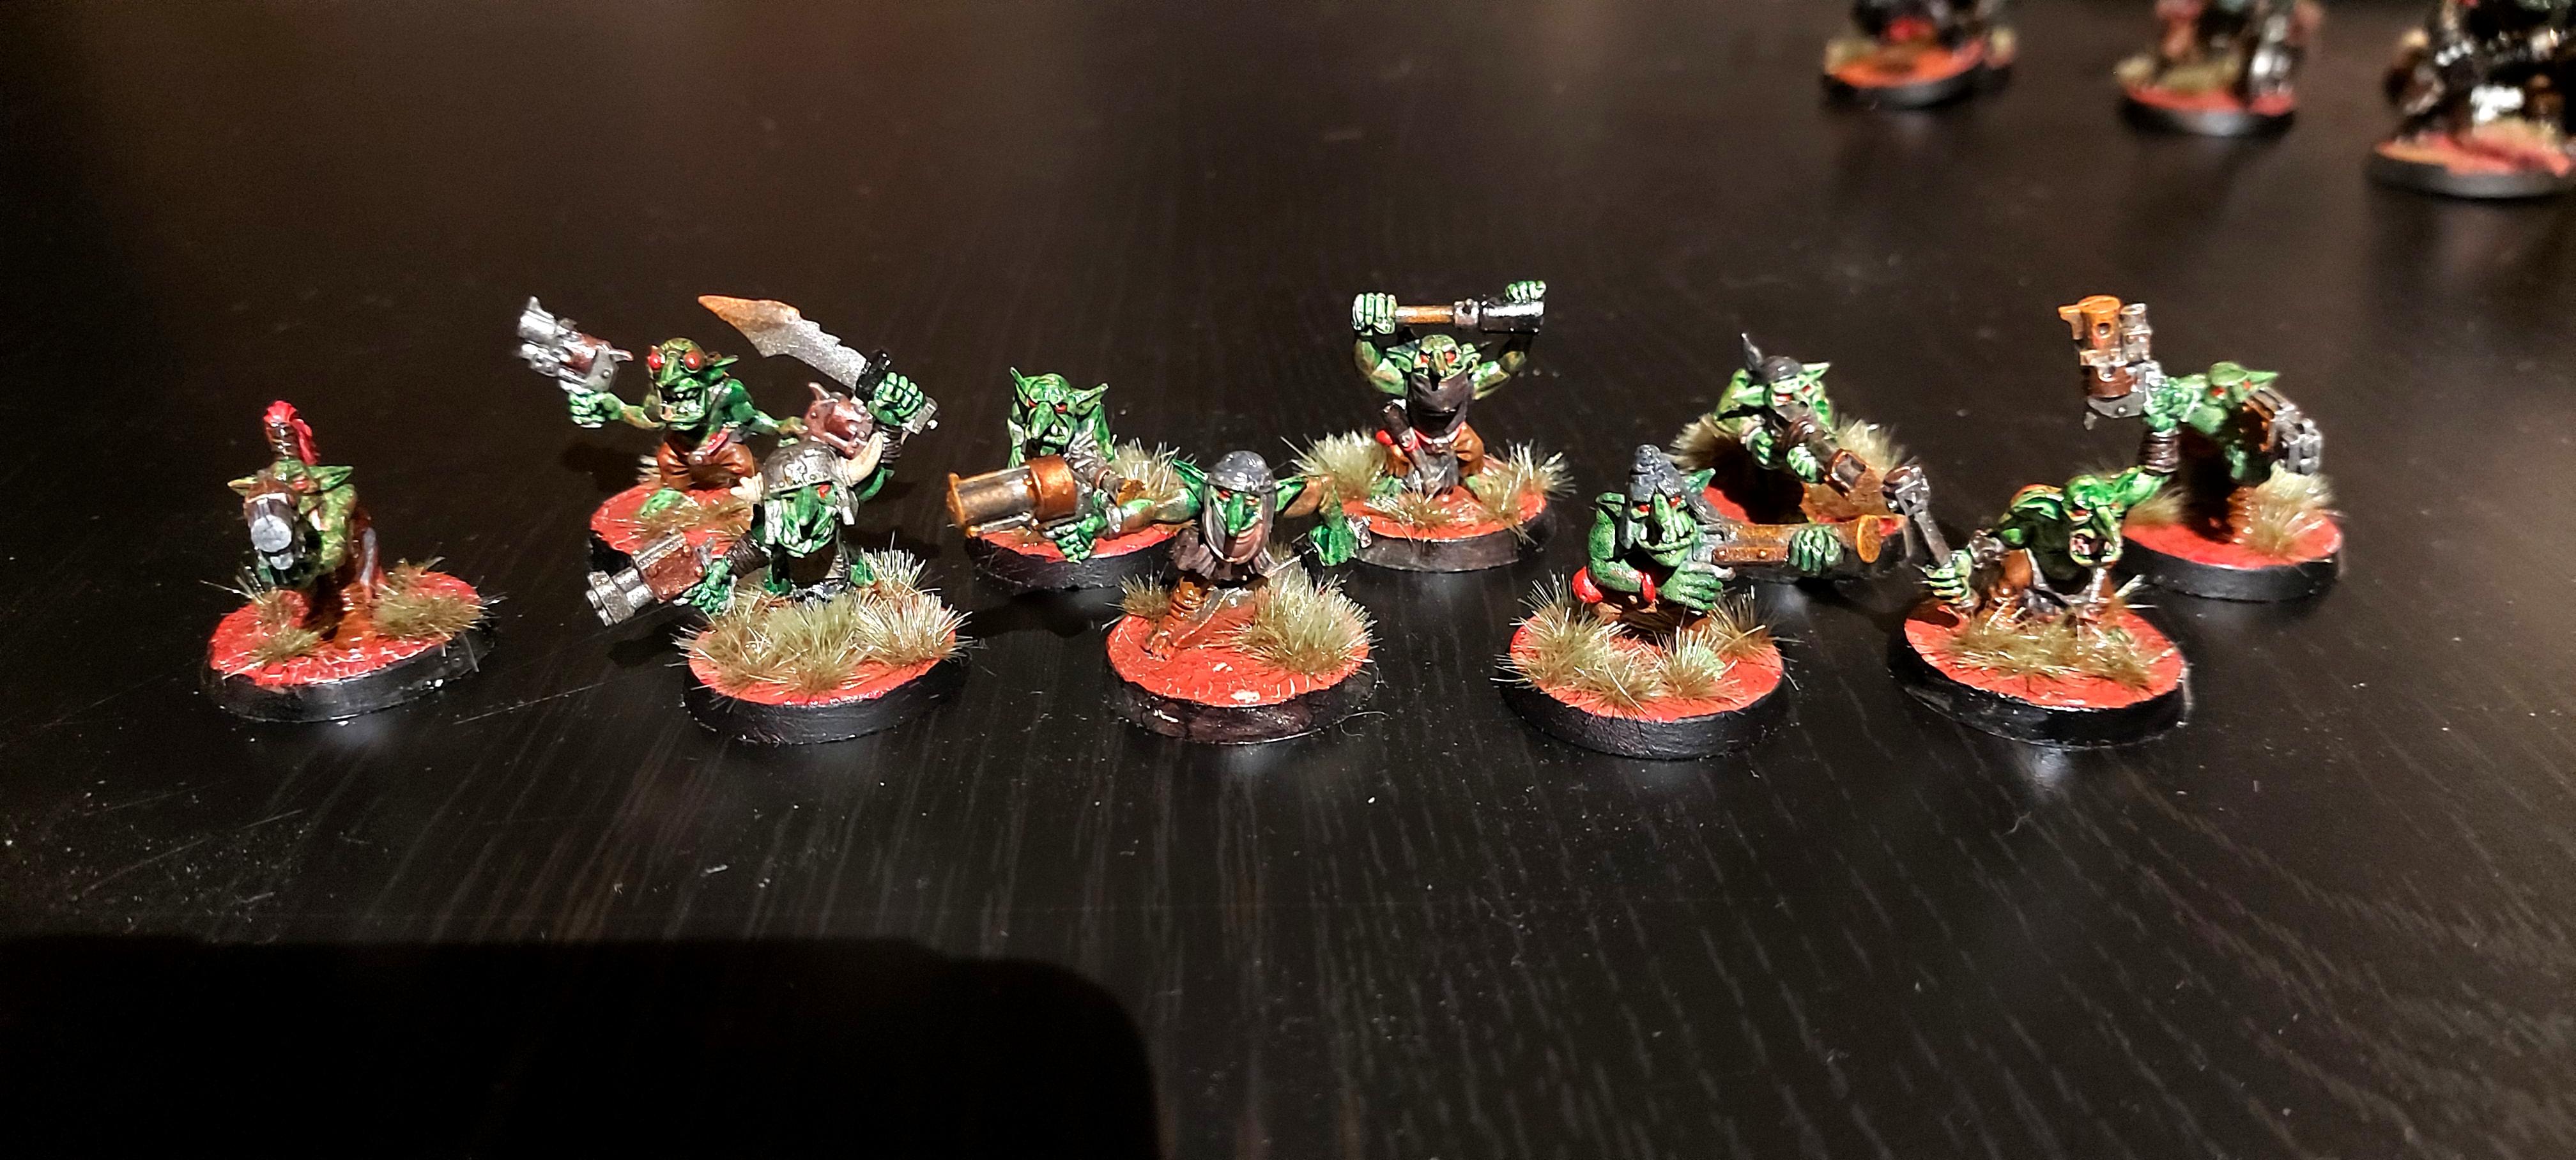 The first Grots